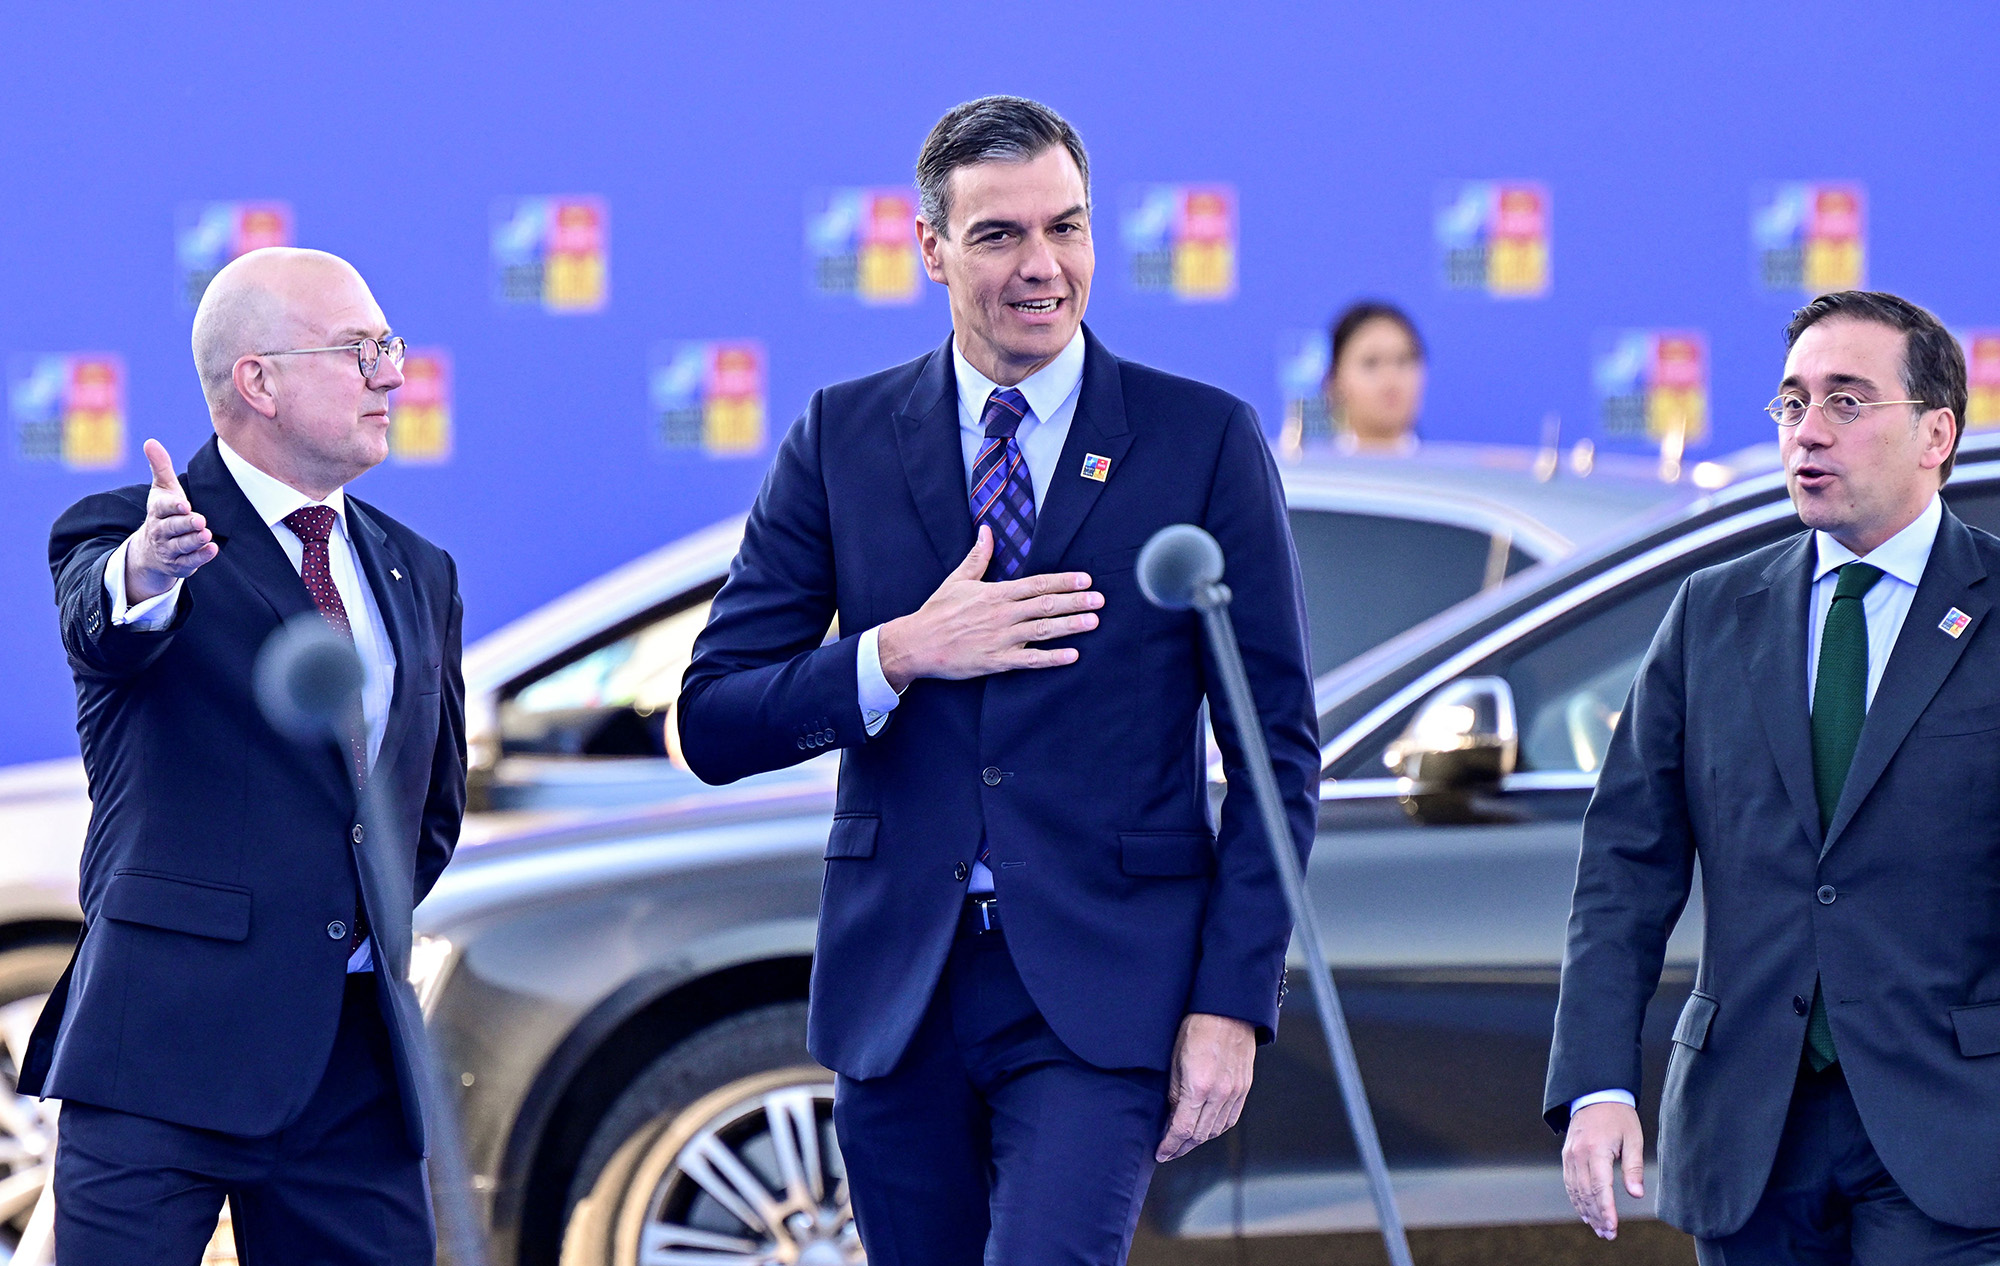 From left, NATO Secretary of the Council Jorgen Christian Jorgensen, Spain's Prime Minister Pedro Sanchez and Spain's Minister for Foreign Affairs Jose Manuel Albares arrive for the NATO summit at the Ifema congress centre in Madrid, Spain, on June 29.